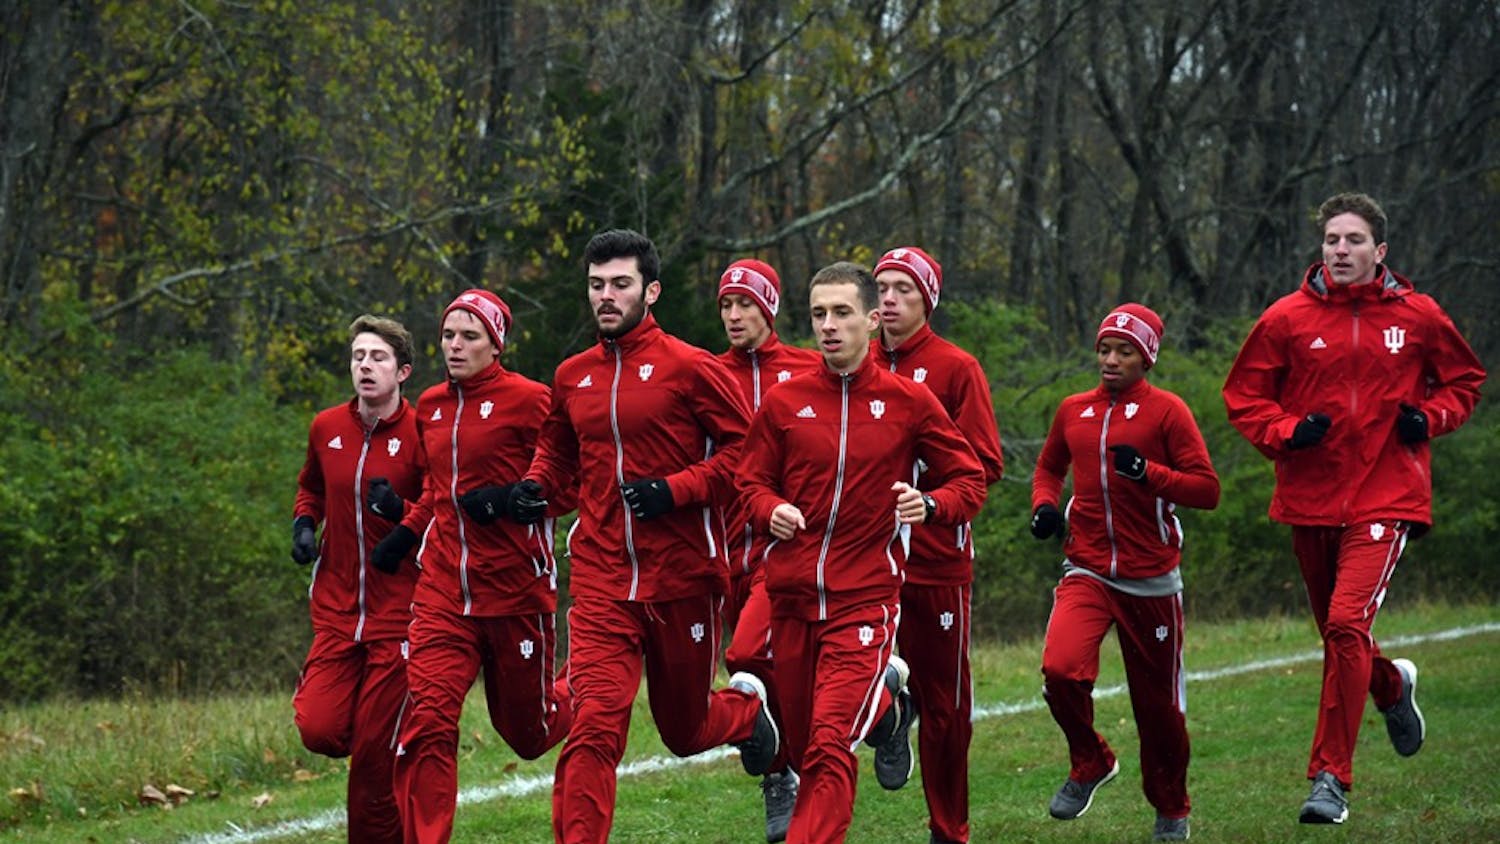 The IU men's cross-country team warms up before its race in the Big Ten Cross Country Championships on Oct. 29, 2017, at the IU Championship Cross Country Course. IU will race in Illini Open this weekend.